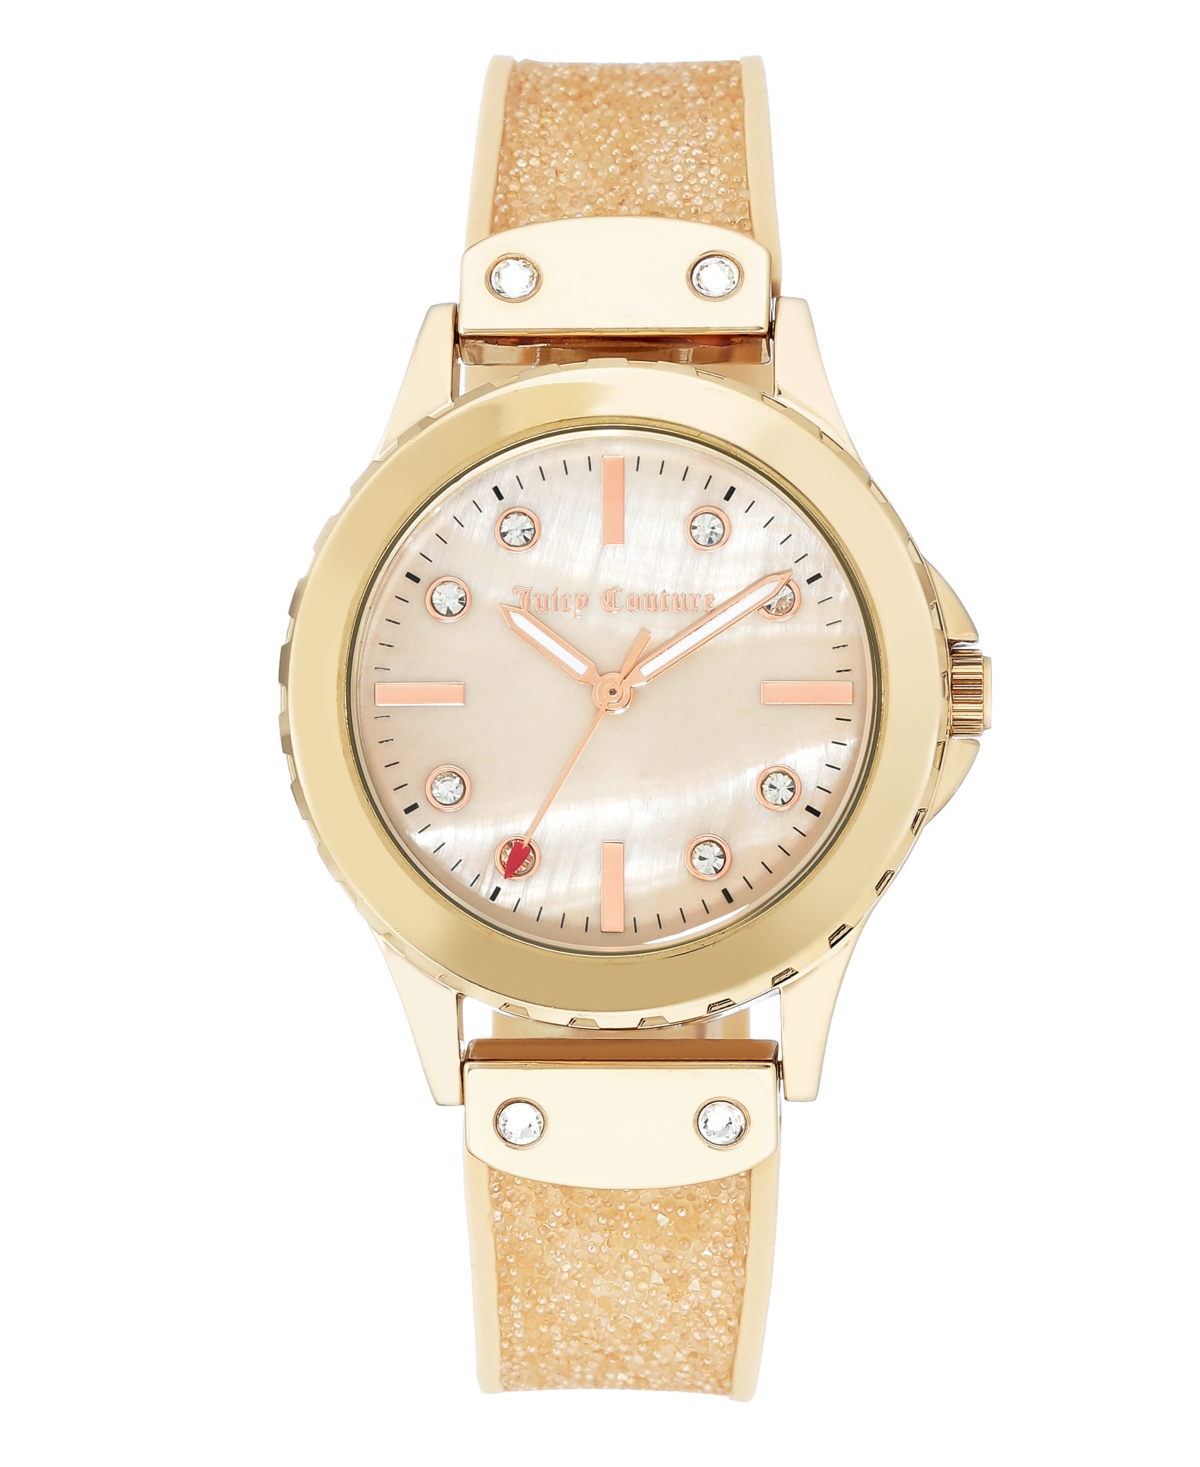 JUICY COUTURE WOMAN'S JUICY COUTURE, 1012RMLP SILICON STRAP WATCH